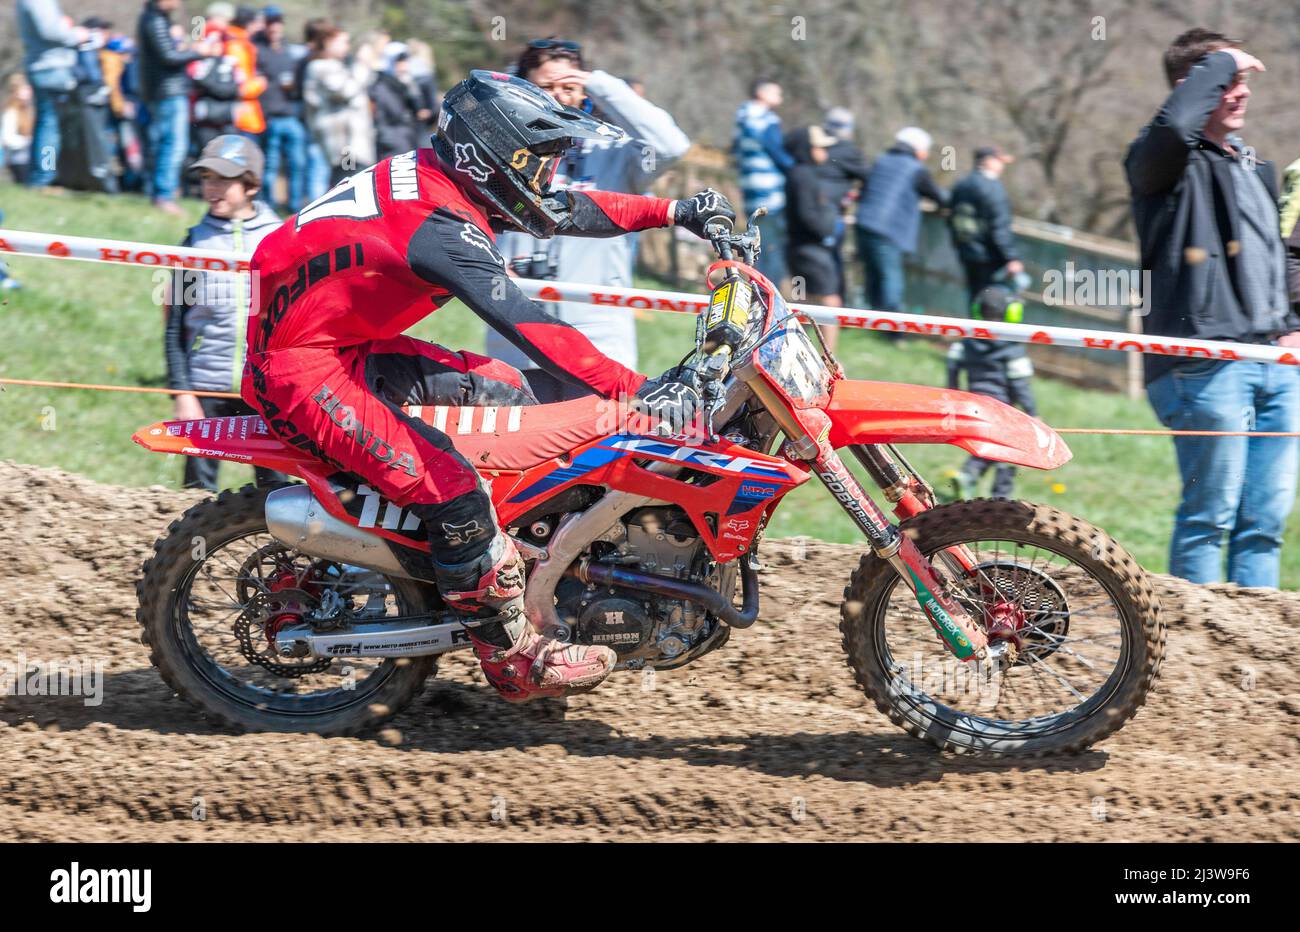 Payerne, Switzerland. 10th April 2022: Timothy Jaunin of Switerland (117) is in action during Grand prix Payerne of the Swiss Federation Motocross Championship 2022. Credit: Eric Dubost/Alamy Live News Stock Photo